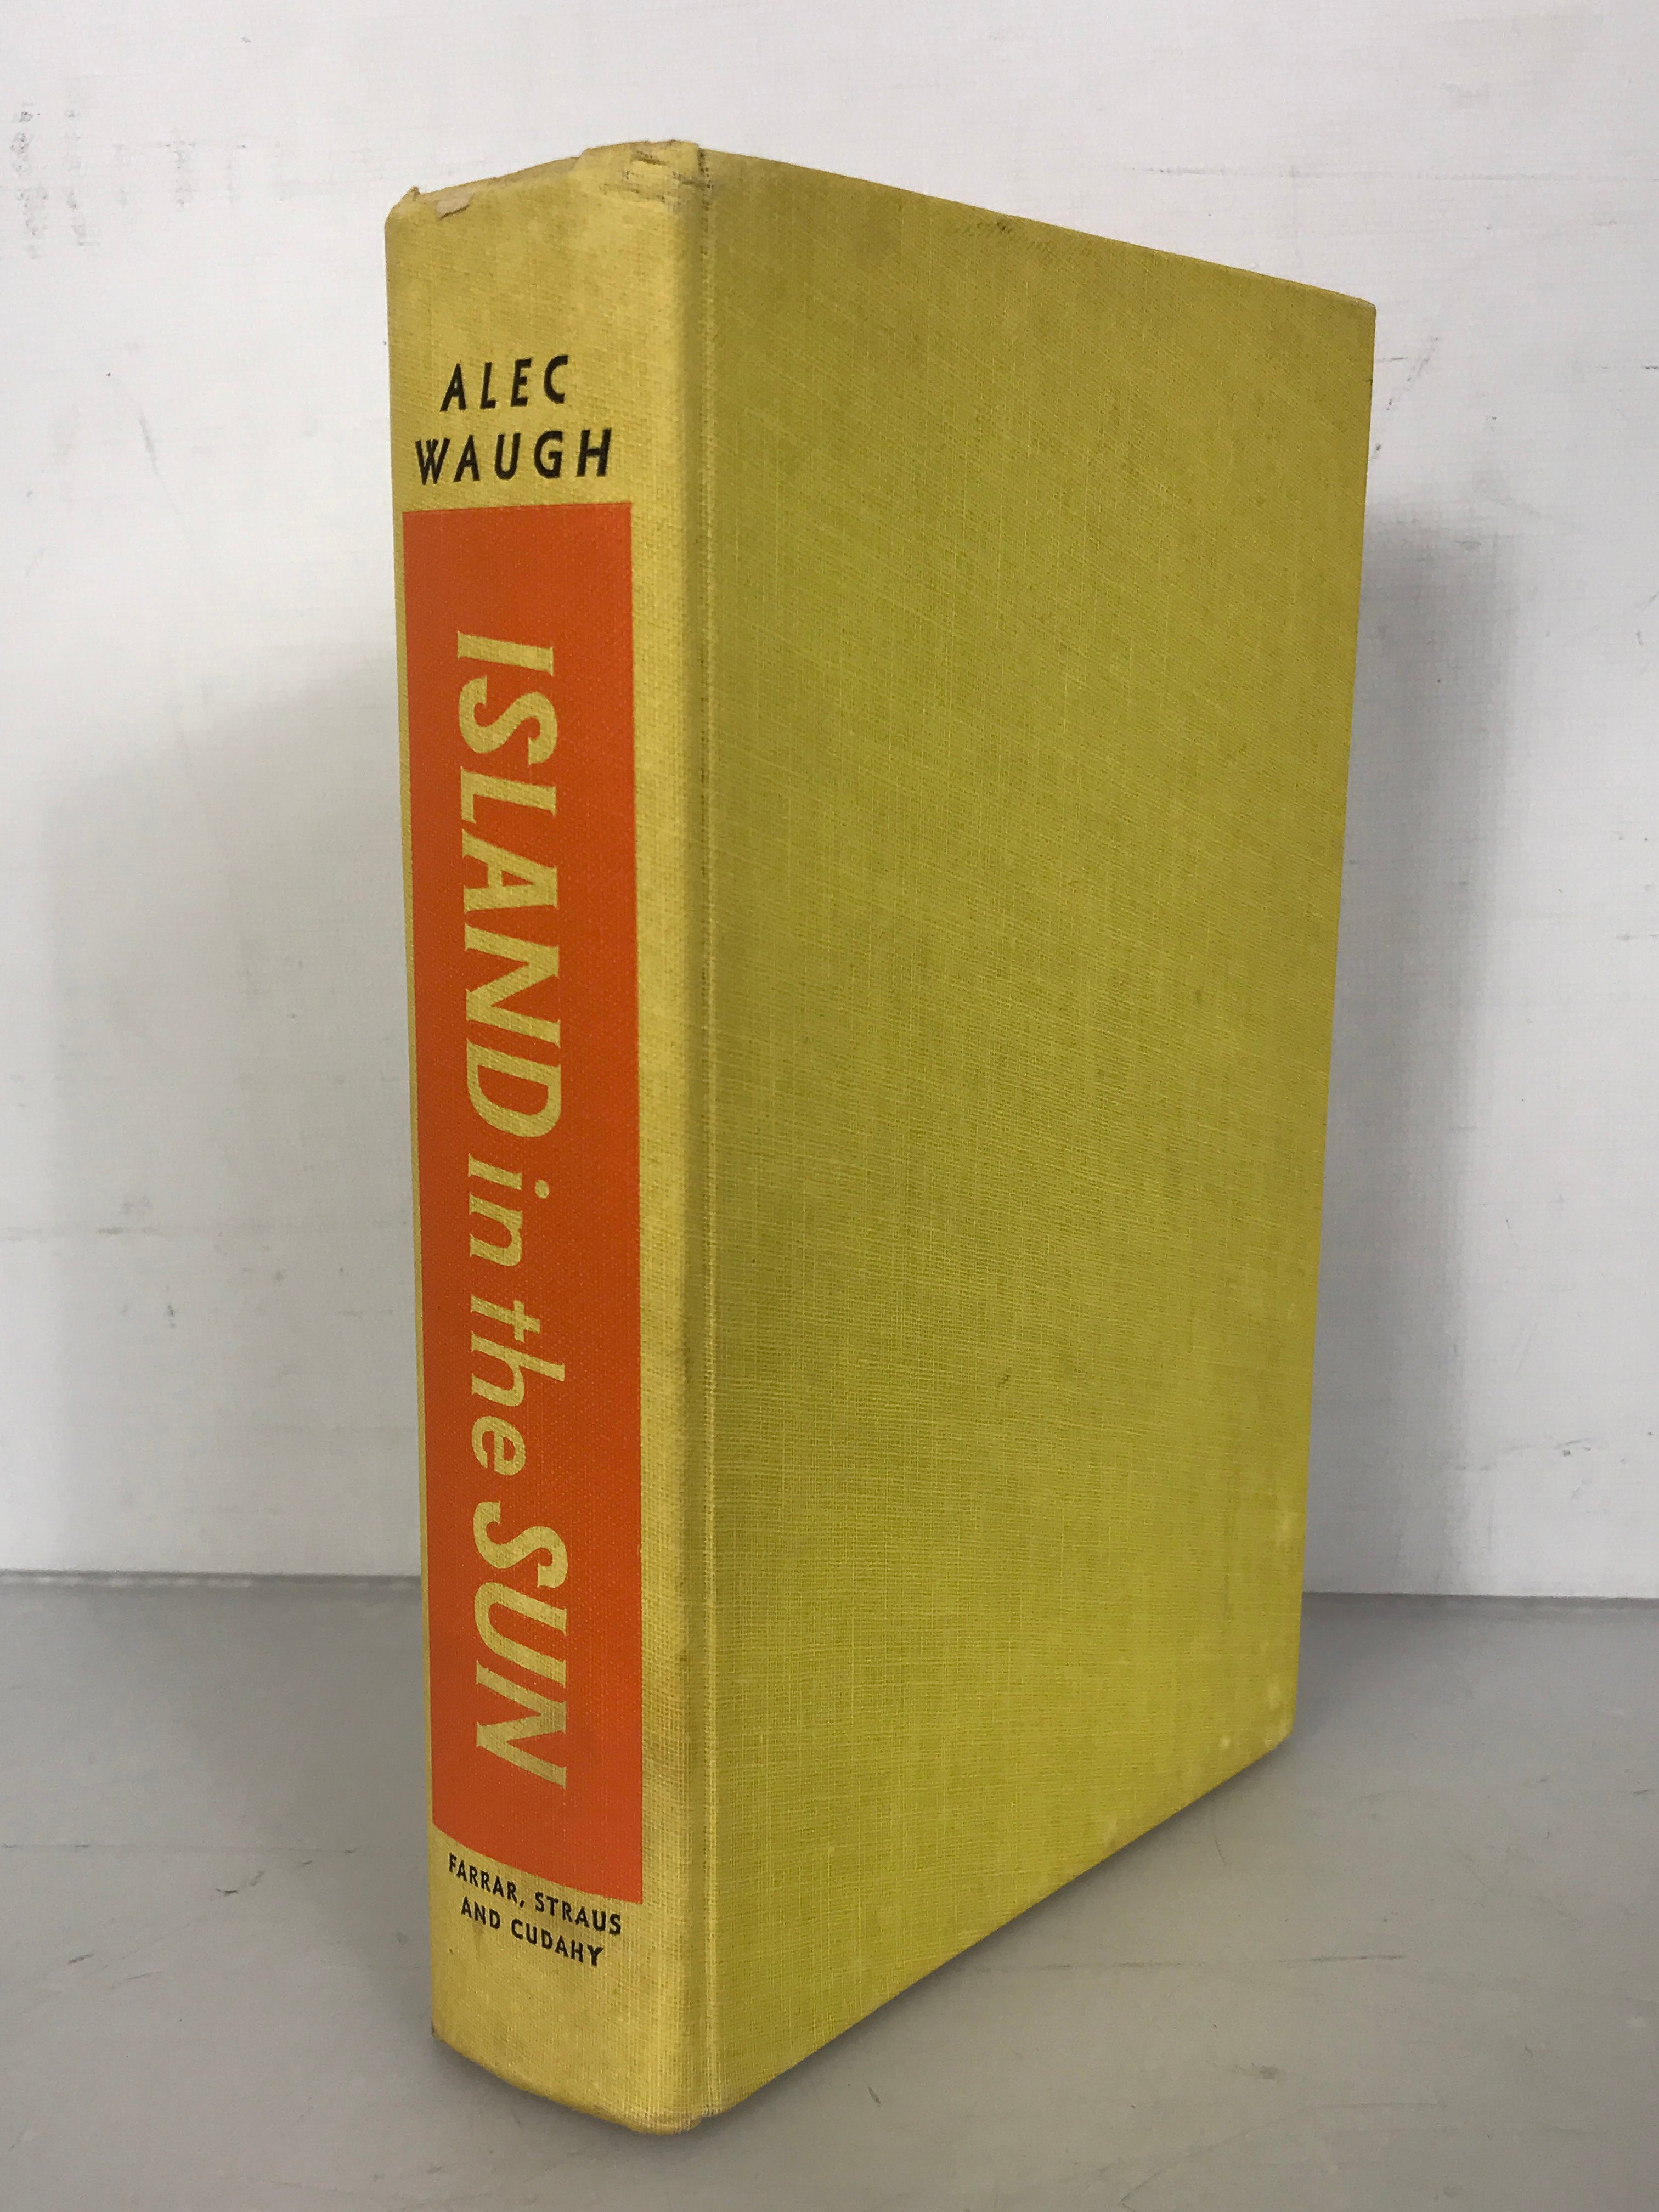 Island in the Sun by Alec Waugh 1955 HC